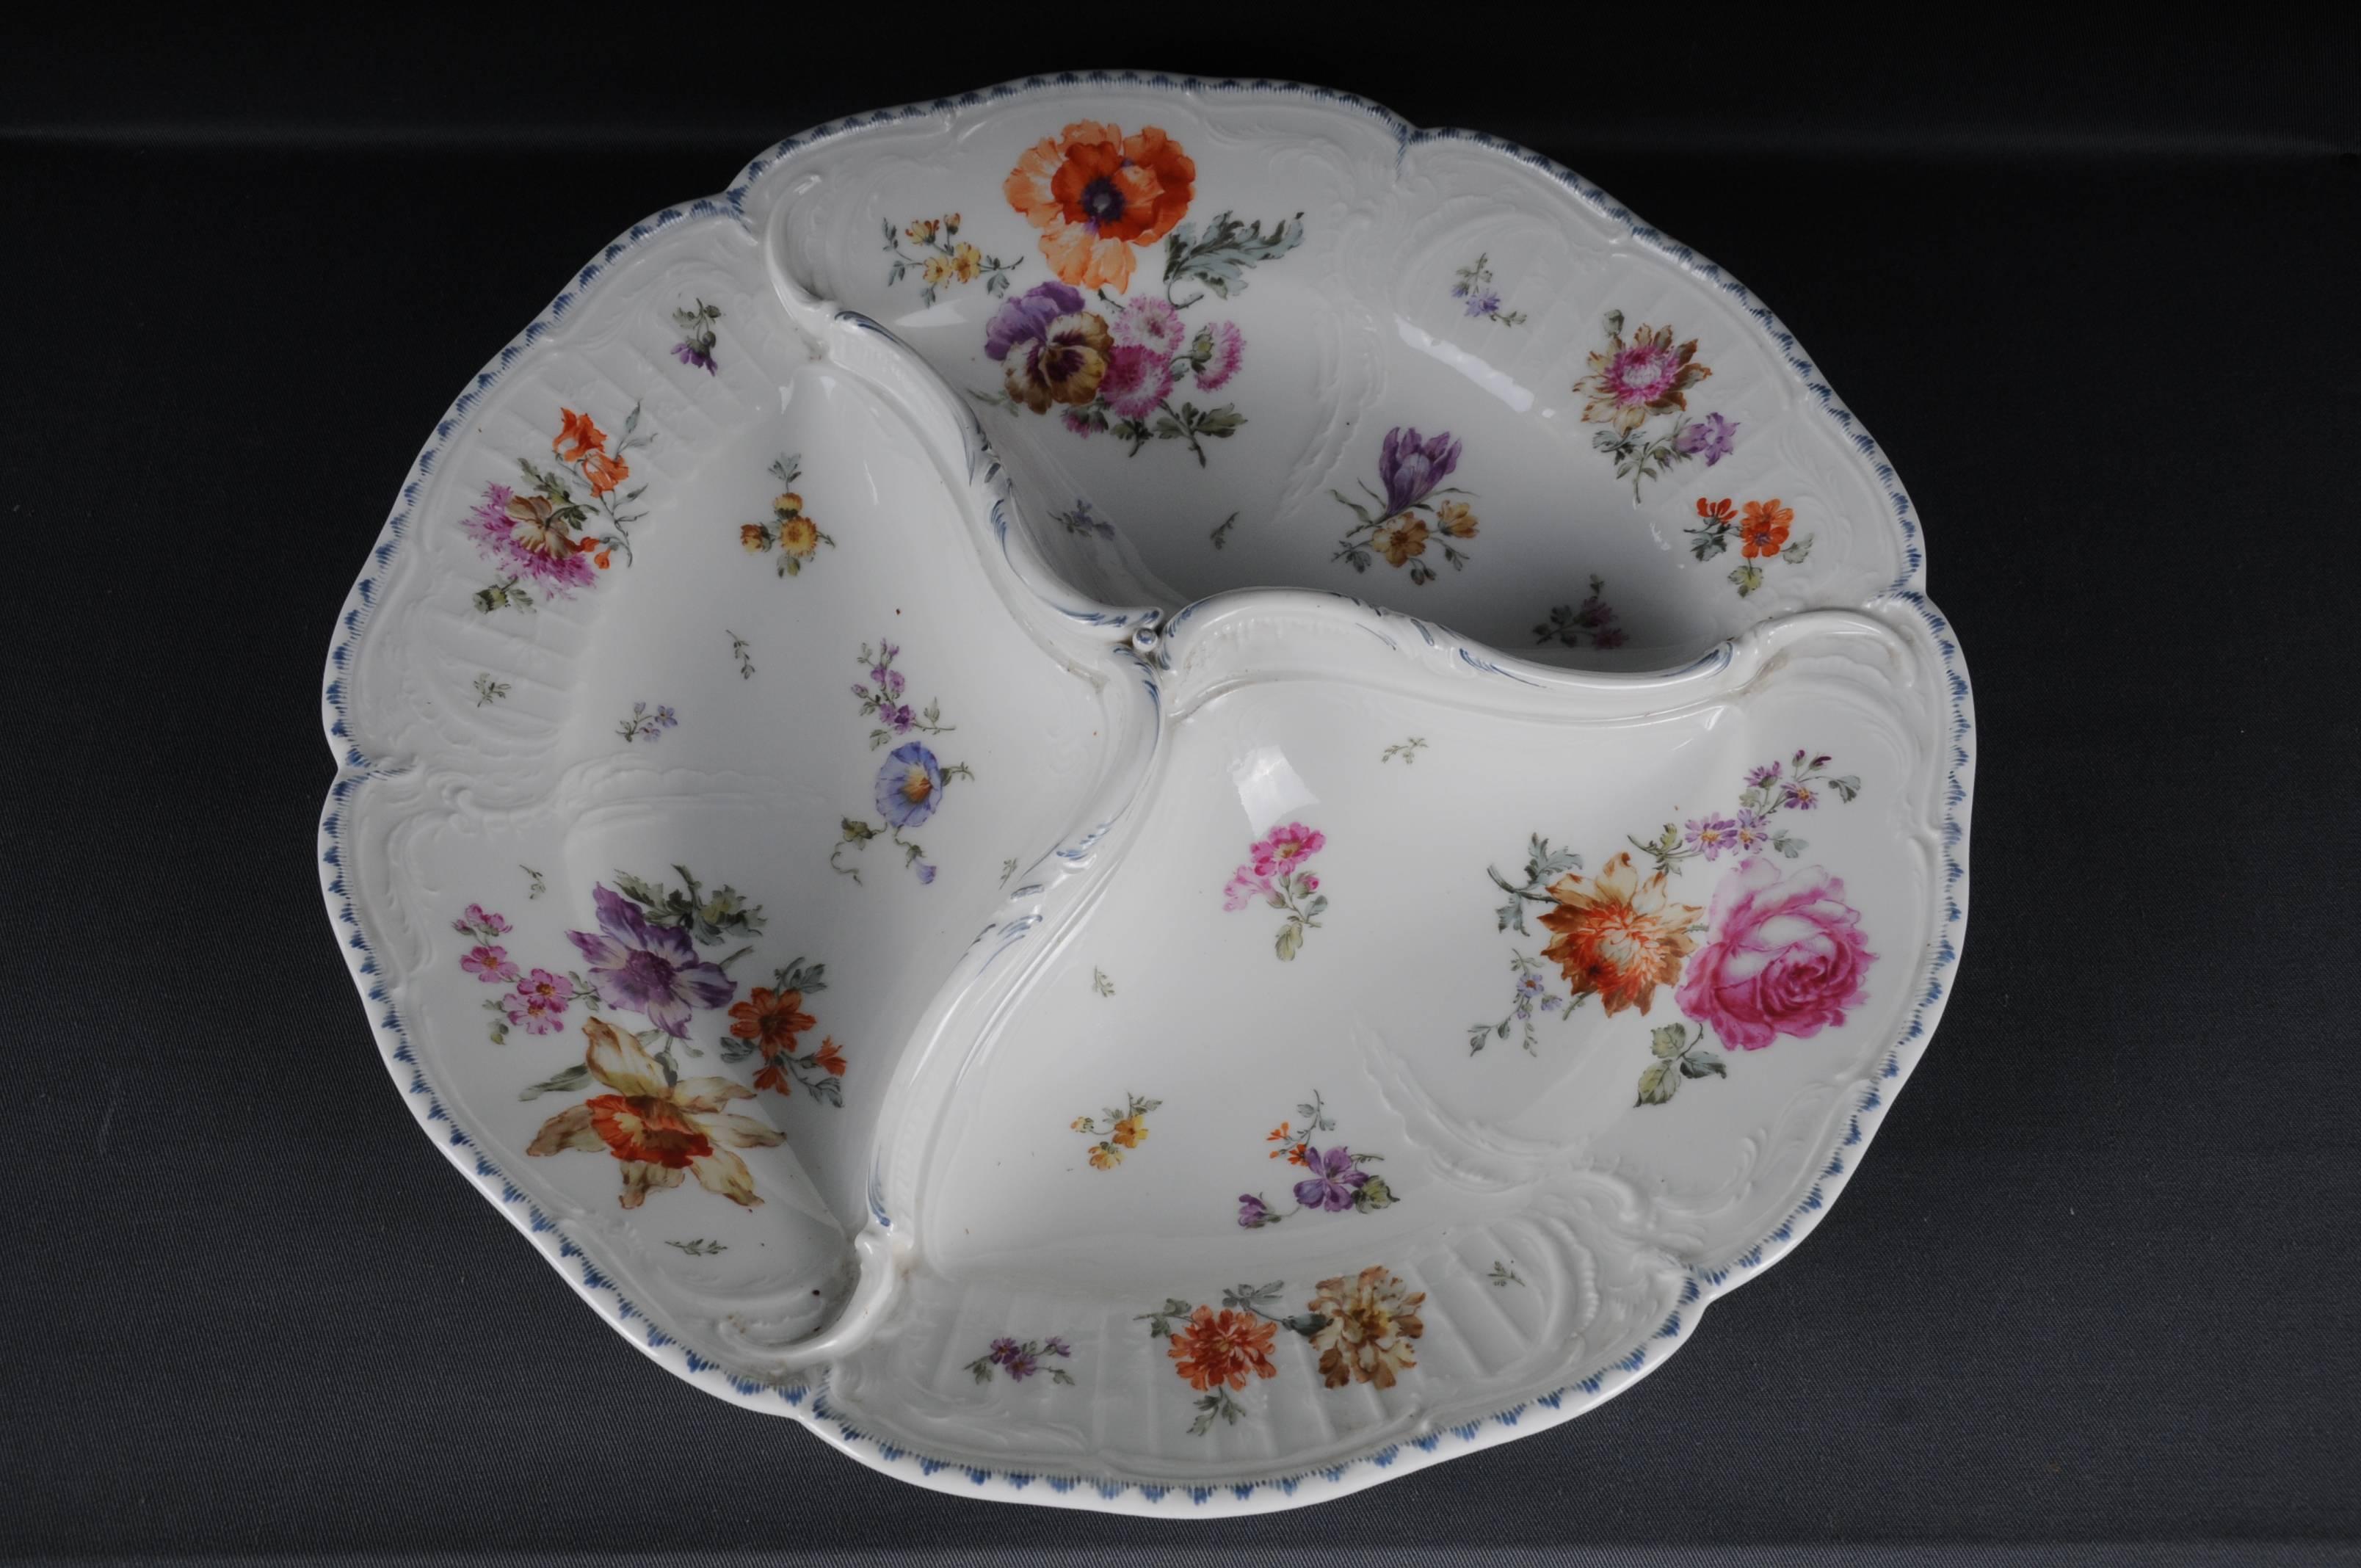 Large rare KPM Berlin plate, bowl Reliefzierat, circa 1860

Extremely rare confectionery dish with three sections. Original KPM Berlin 1st choice with red painting mark circa 1860.
Absolutely high-quality, flower painting which is repeated in the